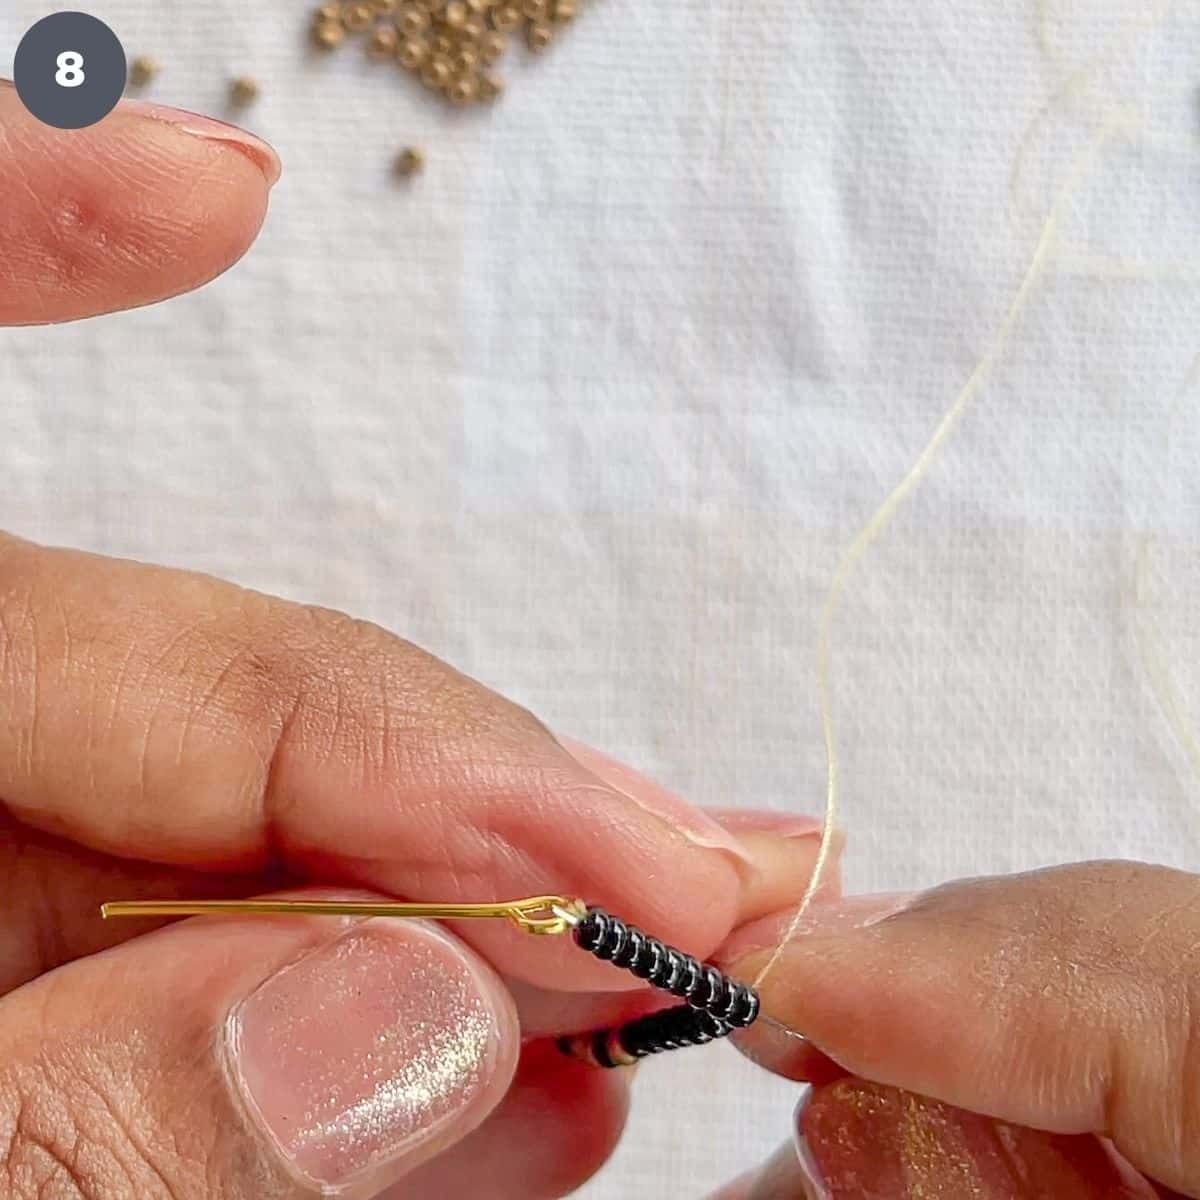 Threading through a strand of black beads with a needle.